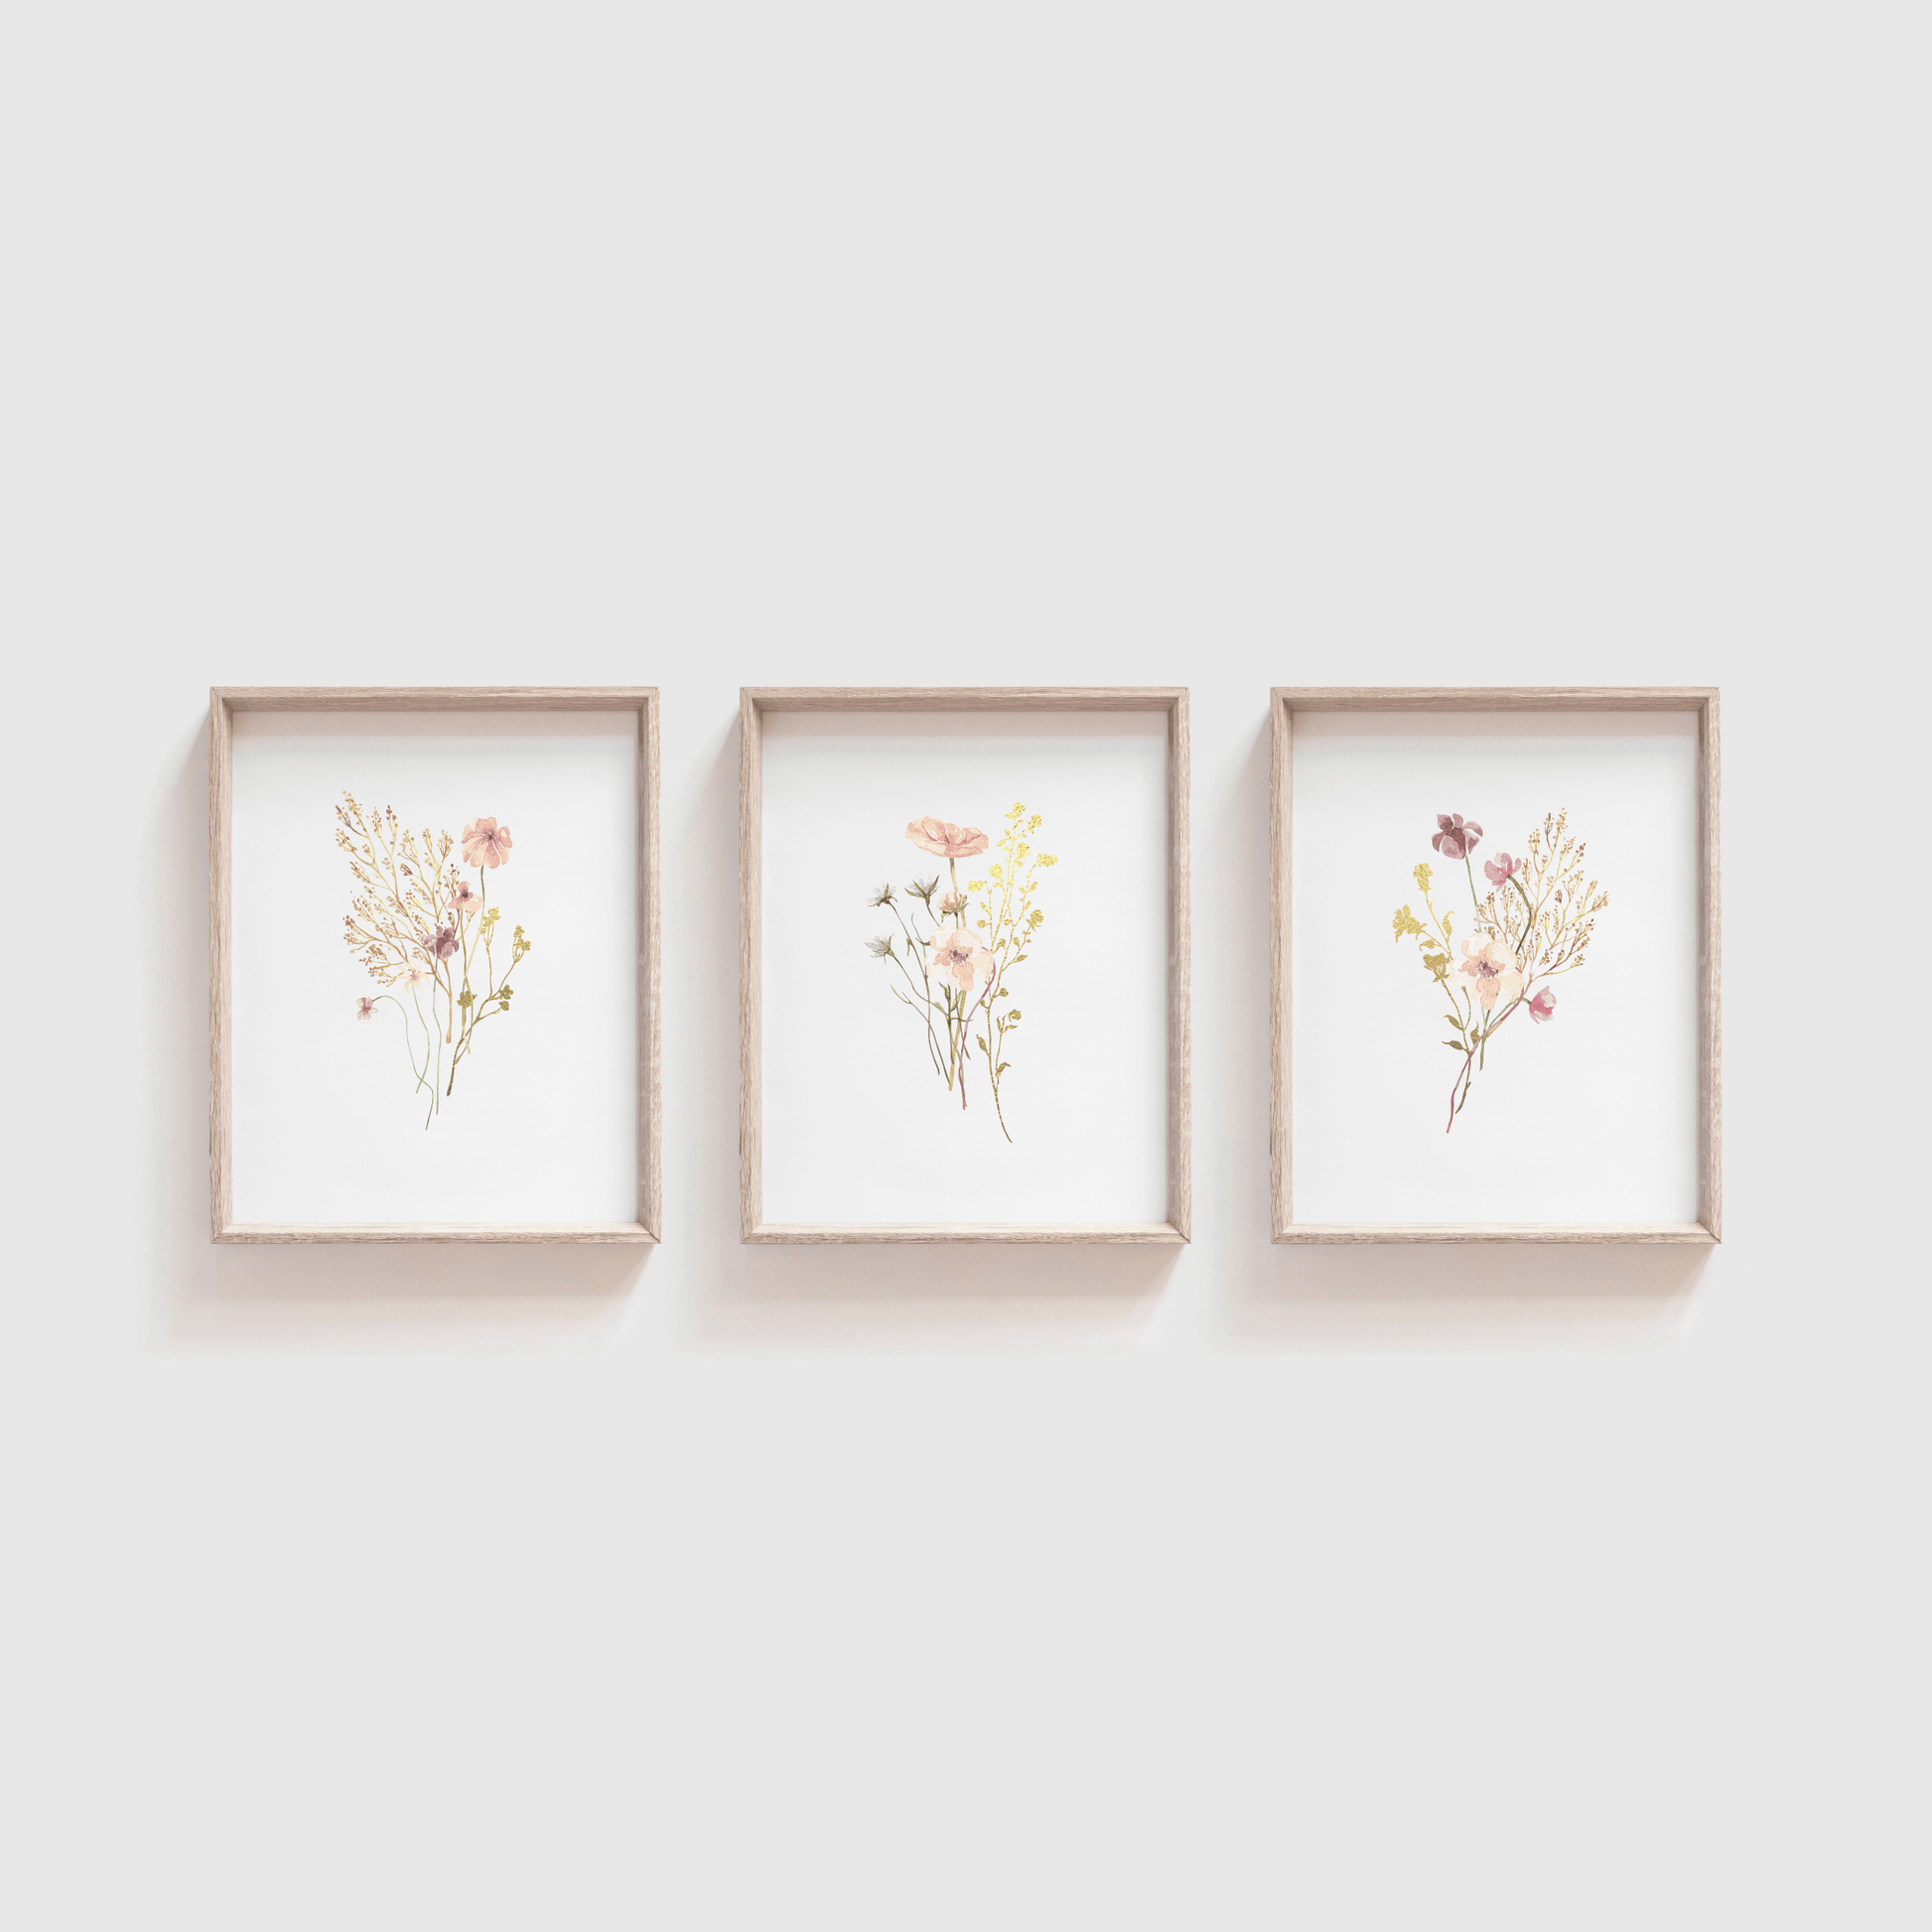 Vintage pink and purple flower wall art in a set of 3 designs